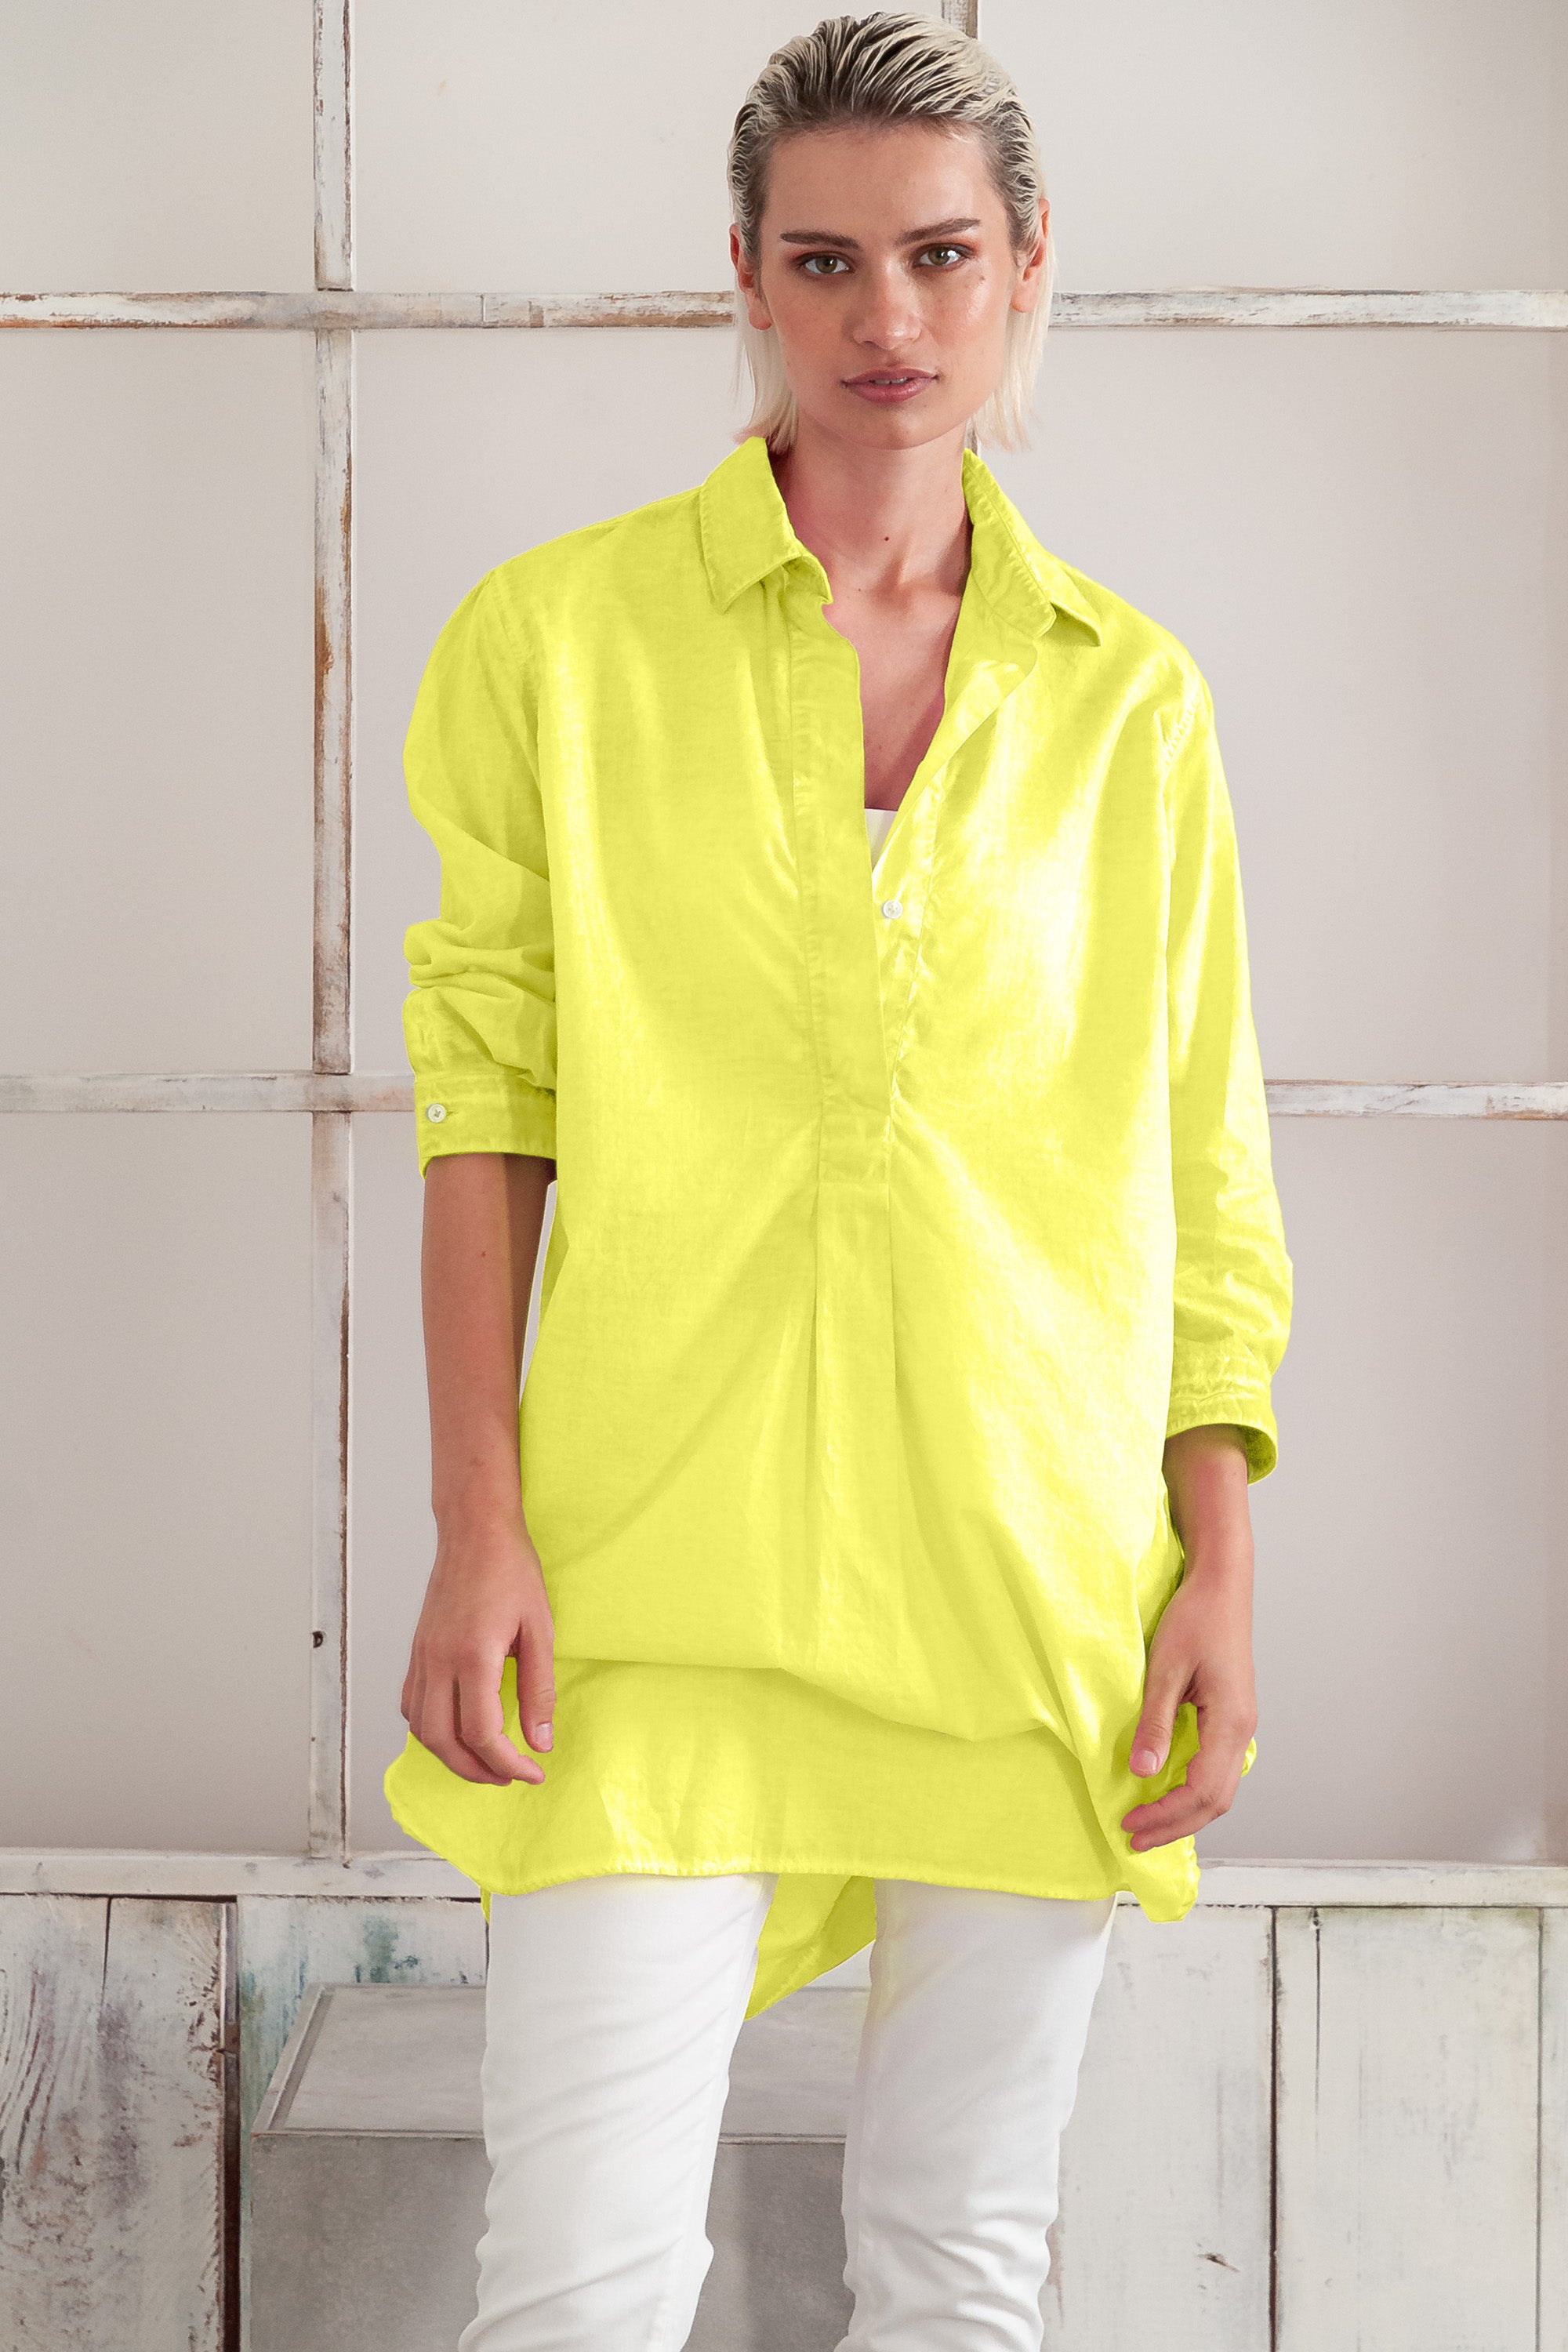 Women's Mini Shirtdress in Cotton Voile - Lime